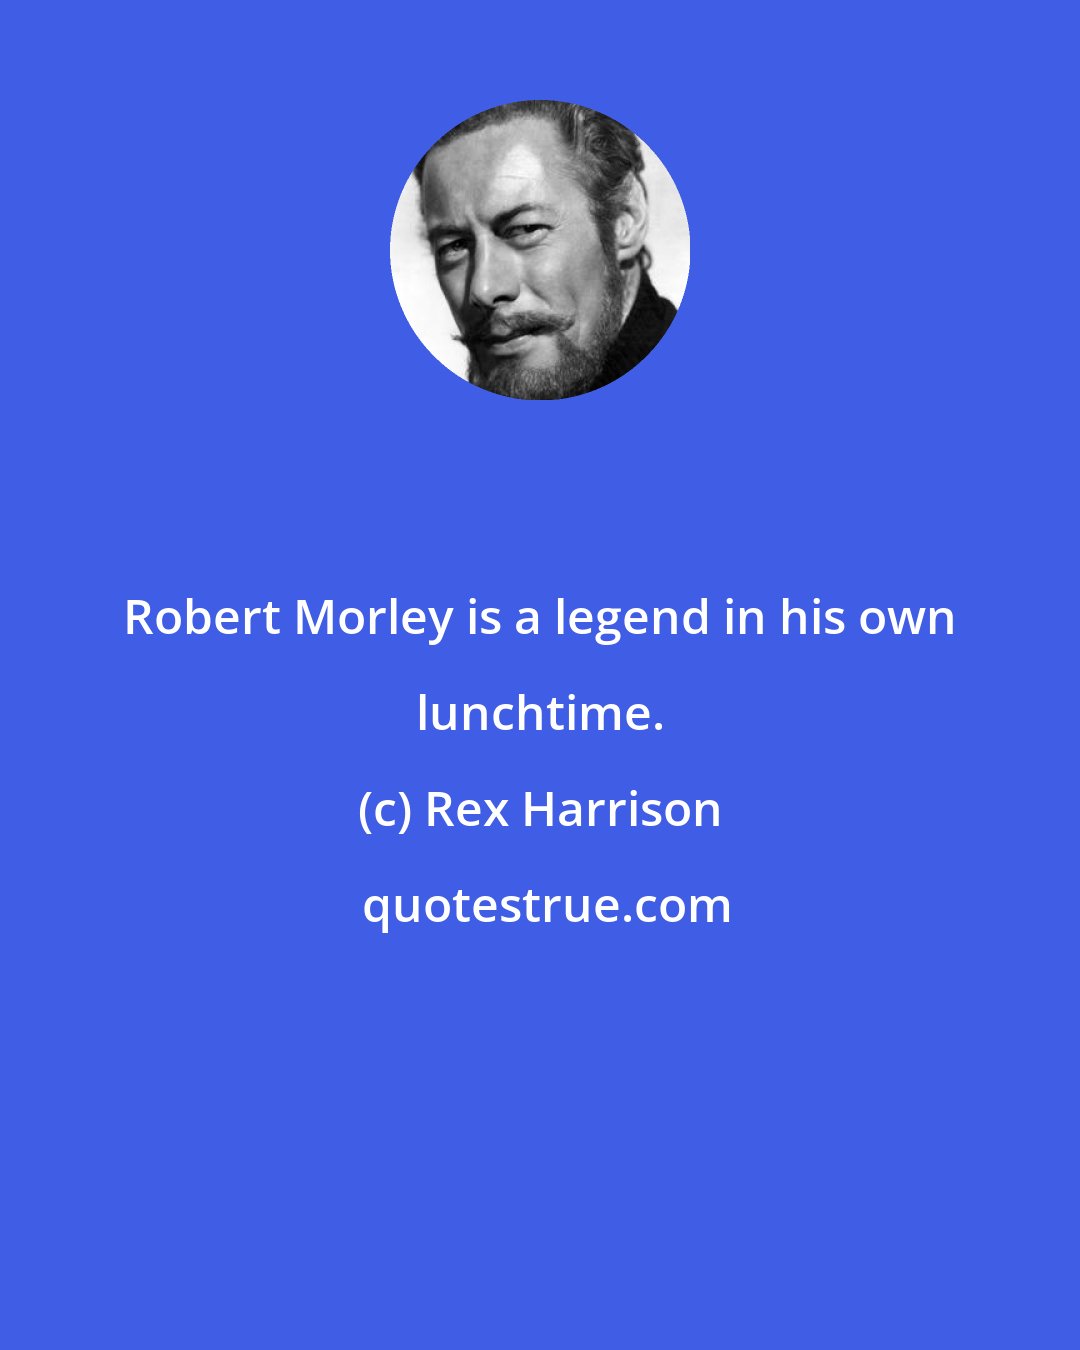 Rex Harrison: Robert Morley is a legend in his own lunchtime.